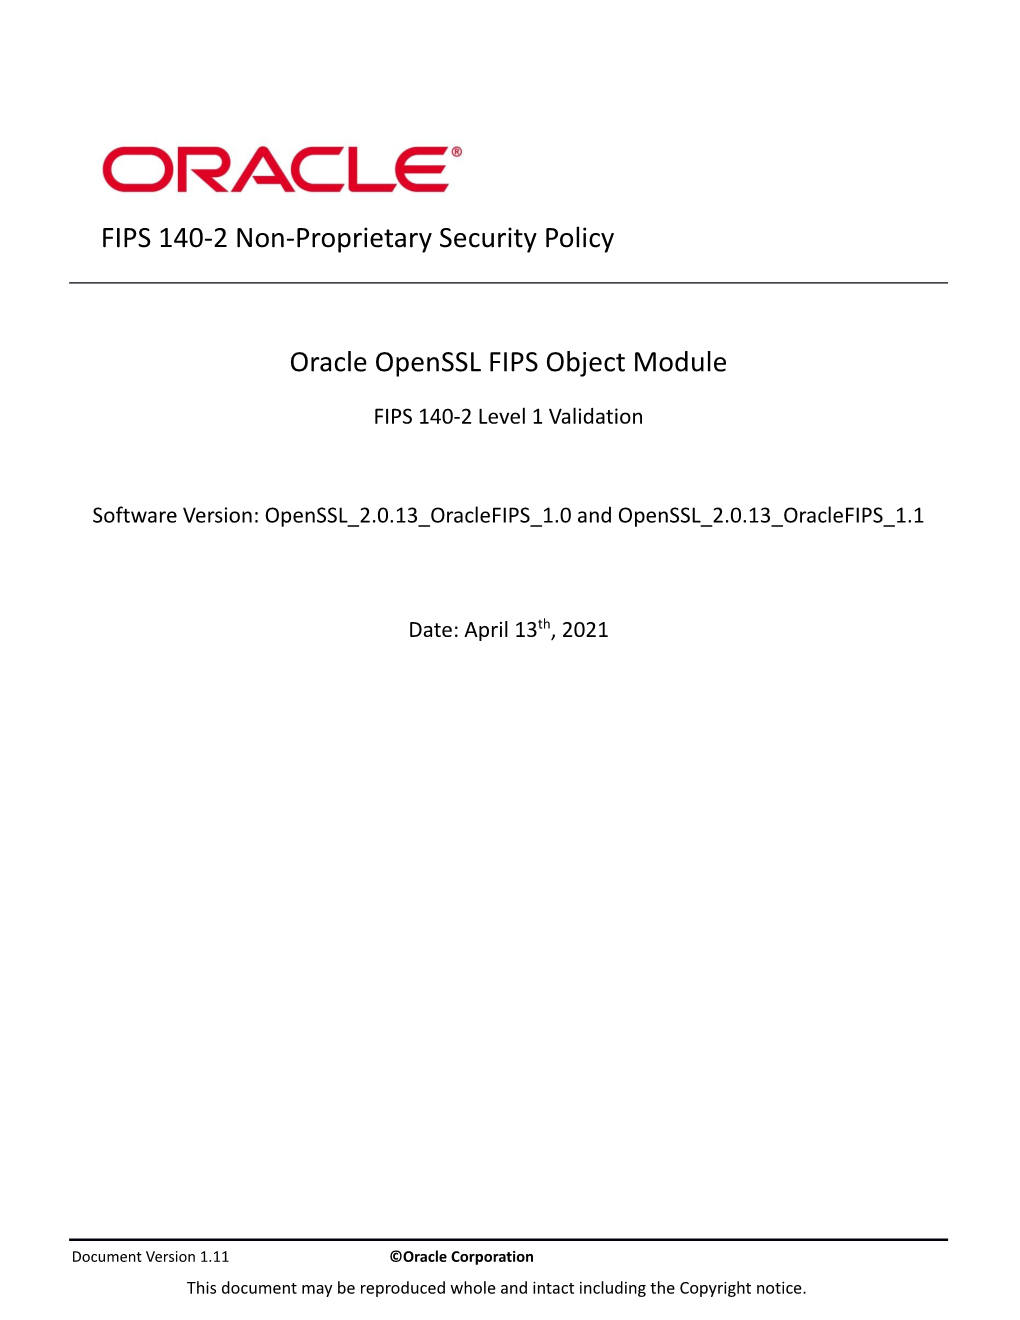 FIPS 140-2 Non-Proprietary Security Policy Oracle Openssl FIPS Object Module